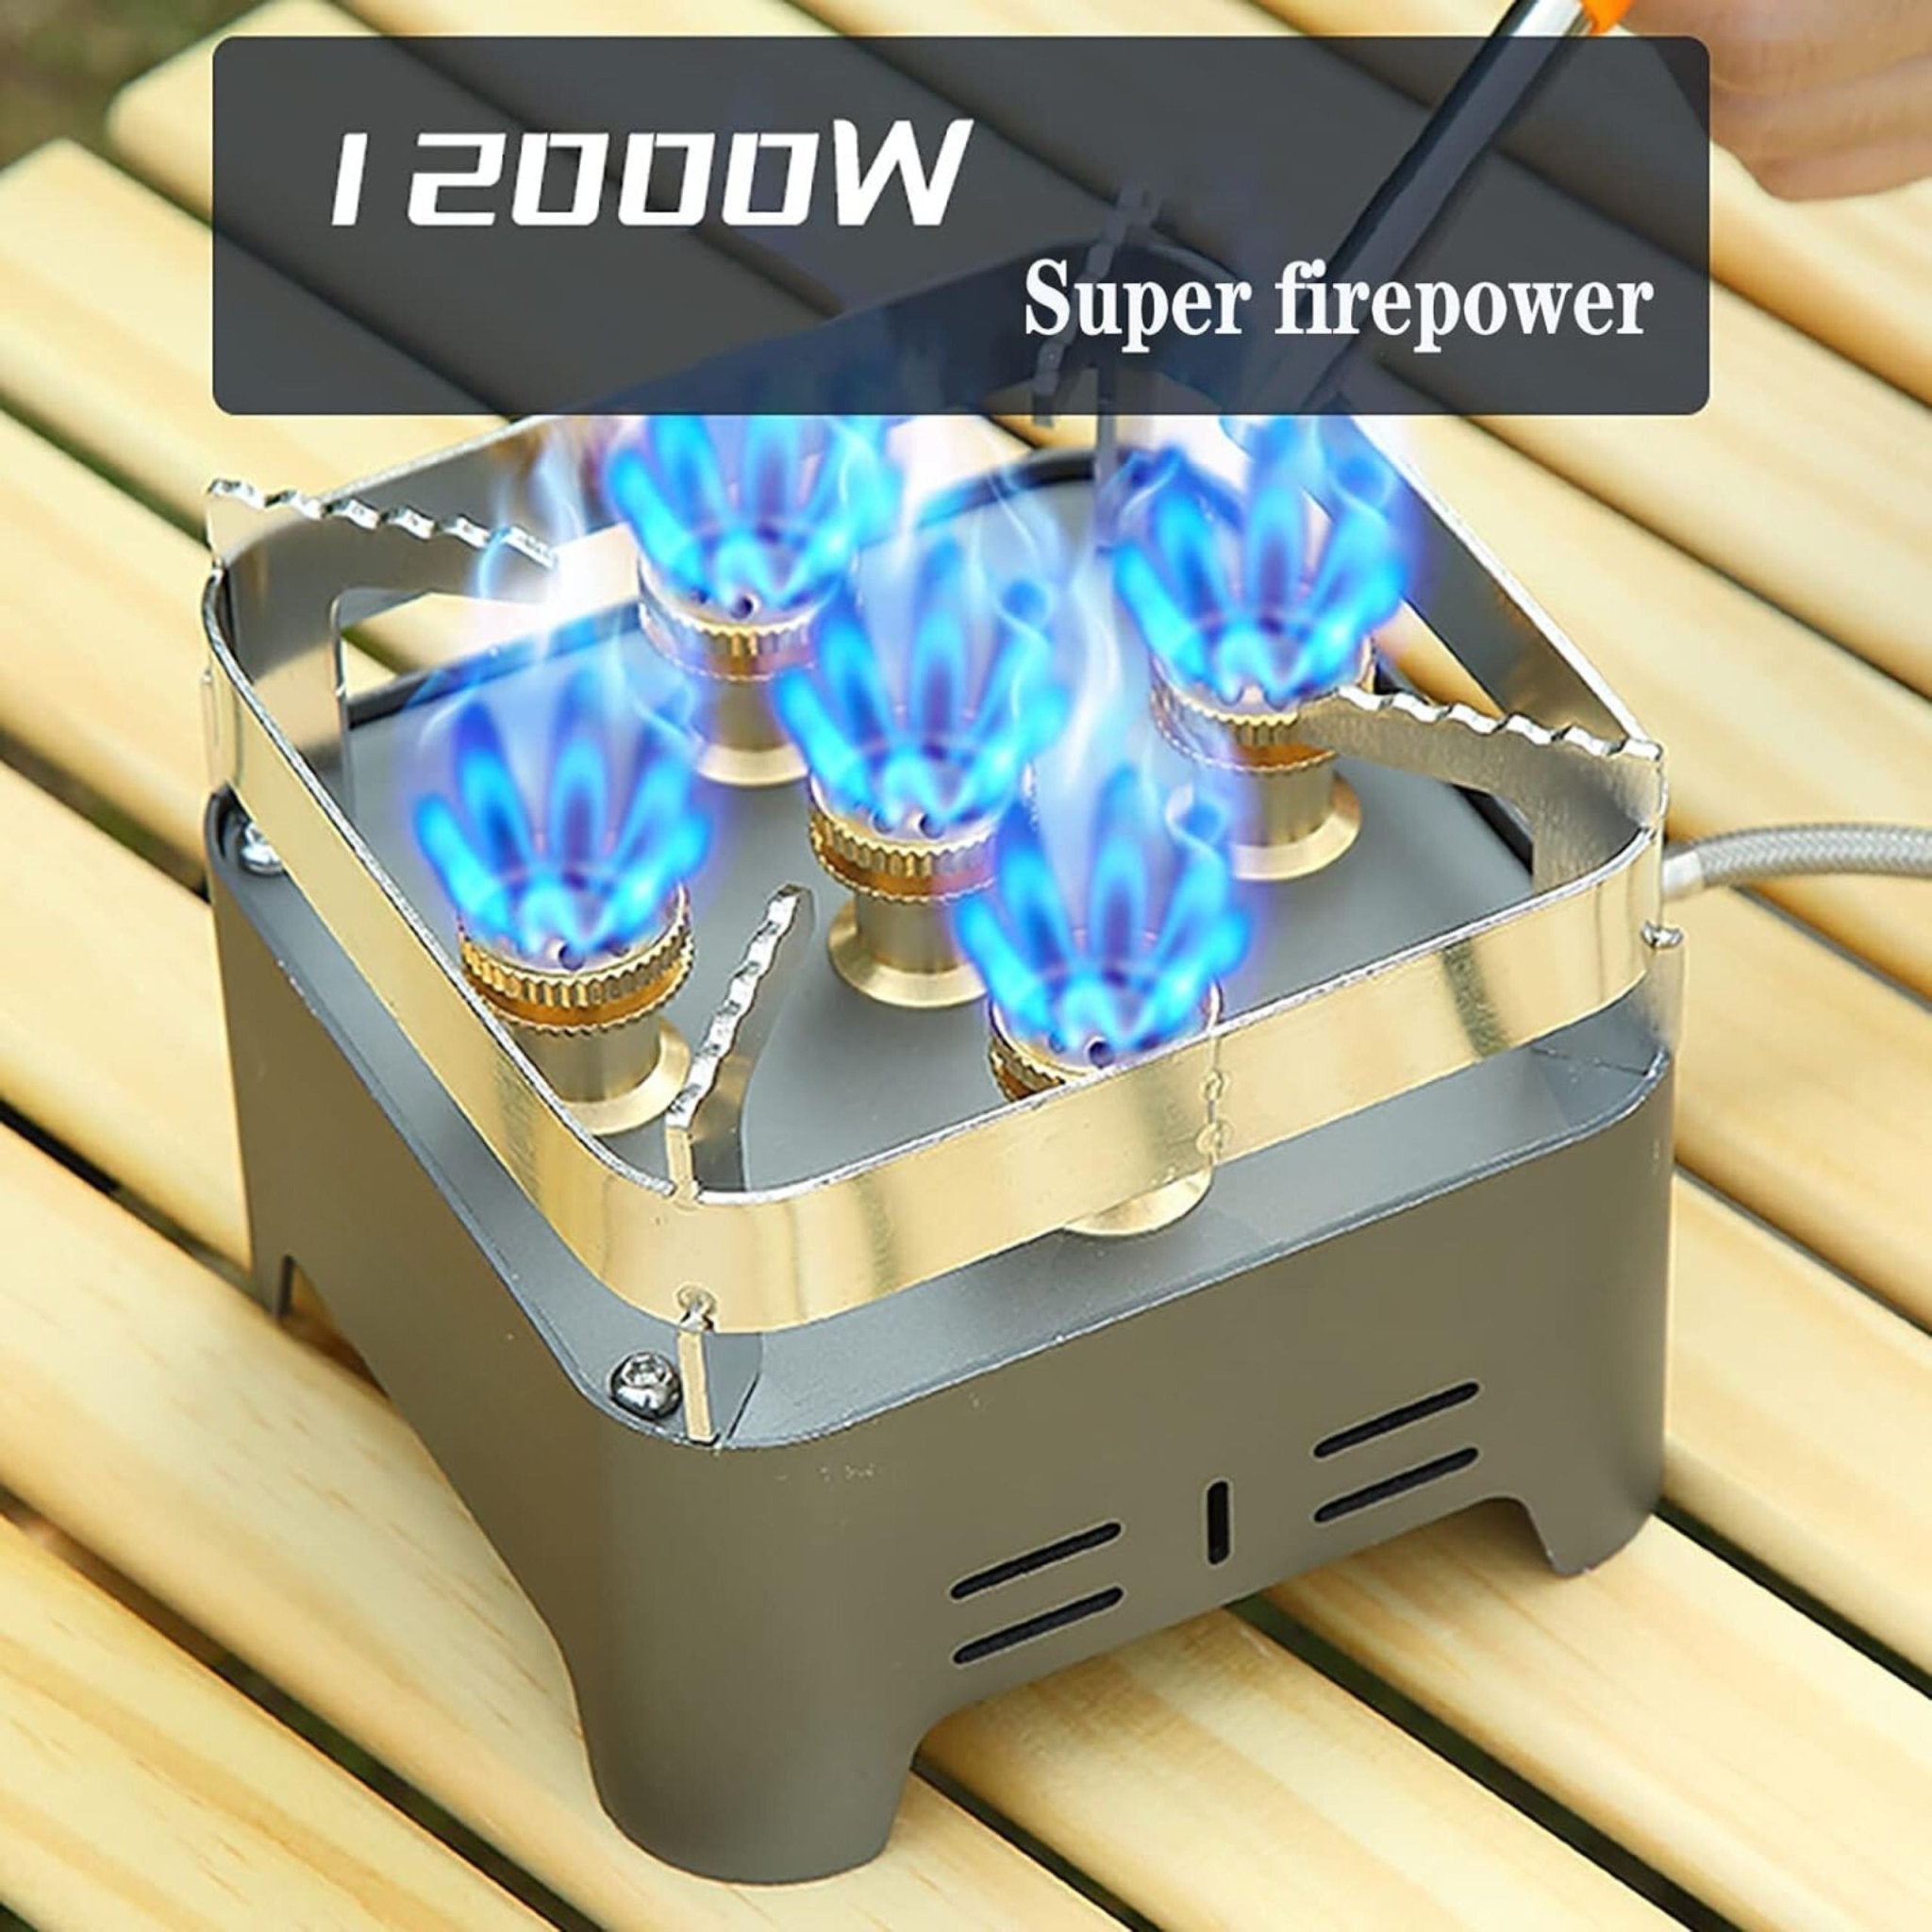 Camping Family Camping Stove 5 Burners 120000W CM-38490 - Gray